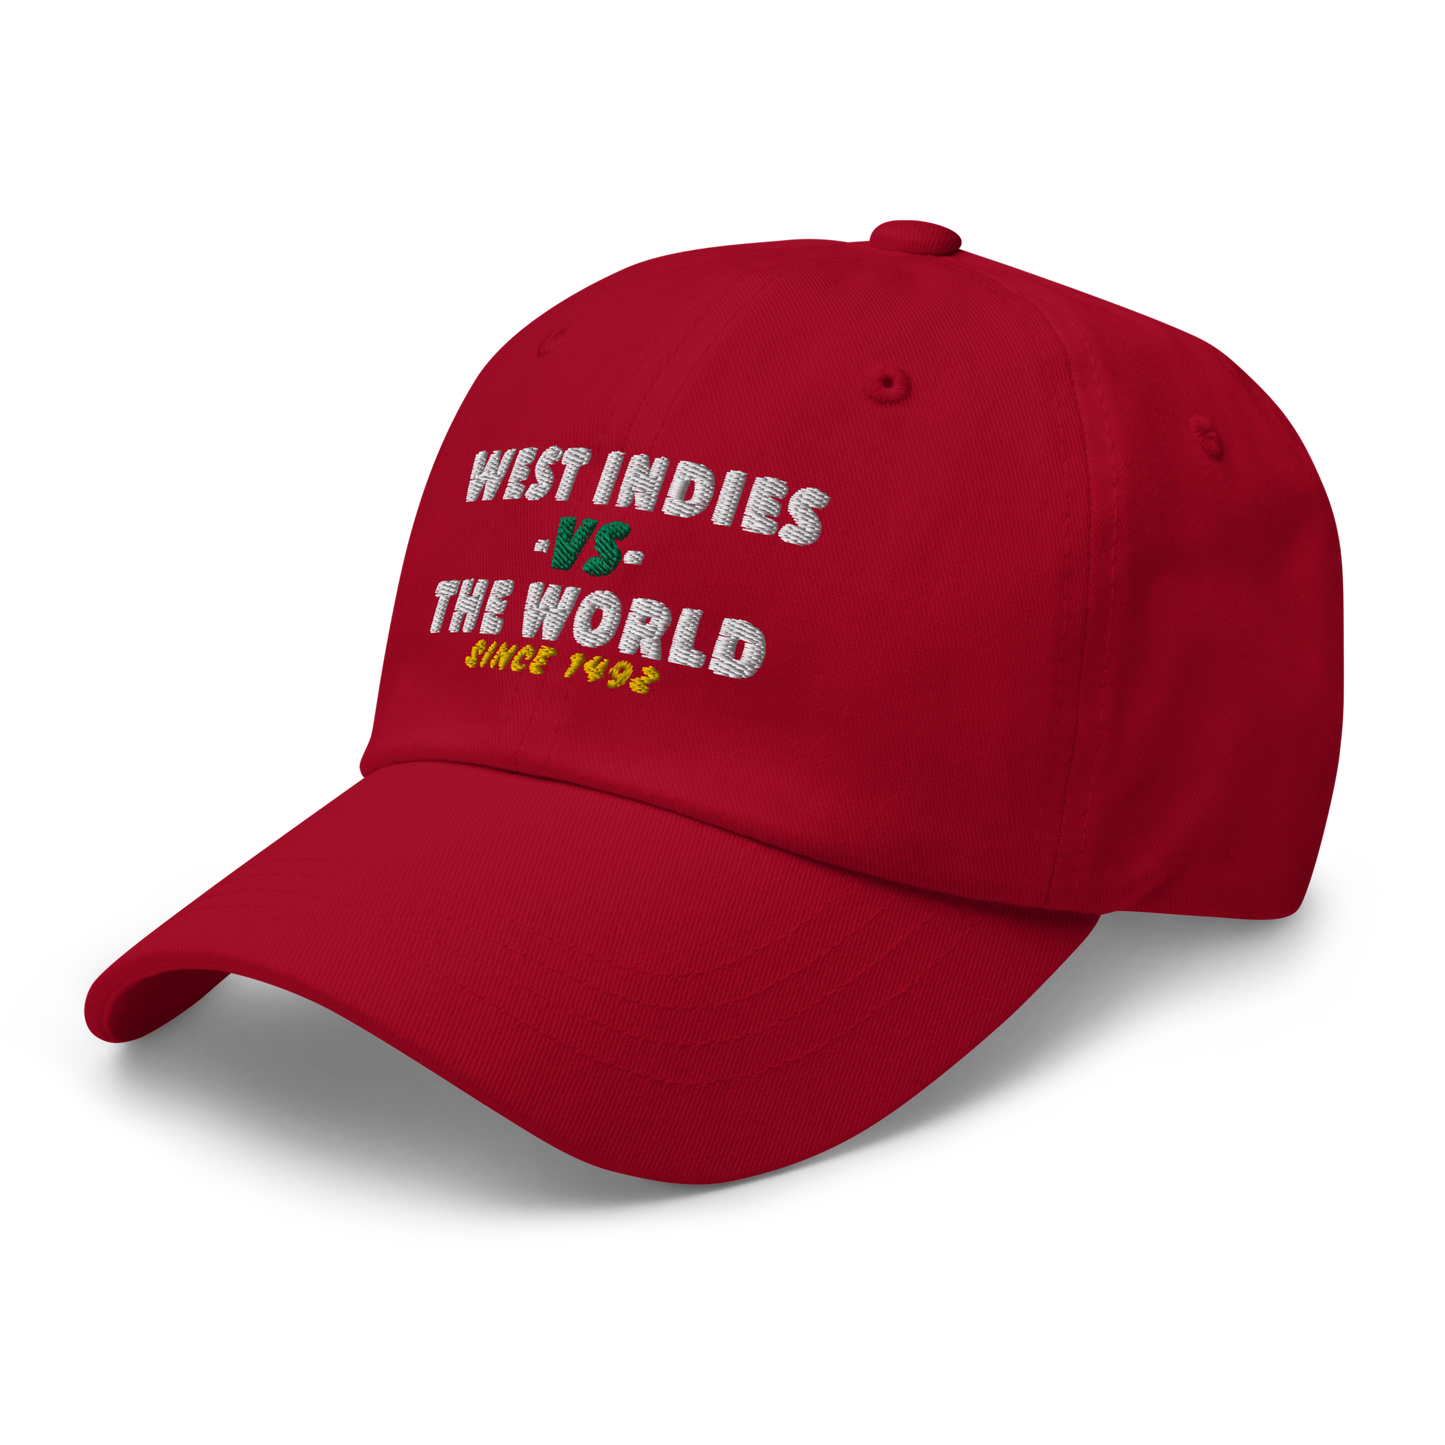 West Indies -vs- The World Dad hat